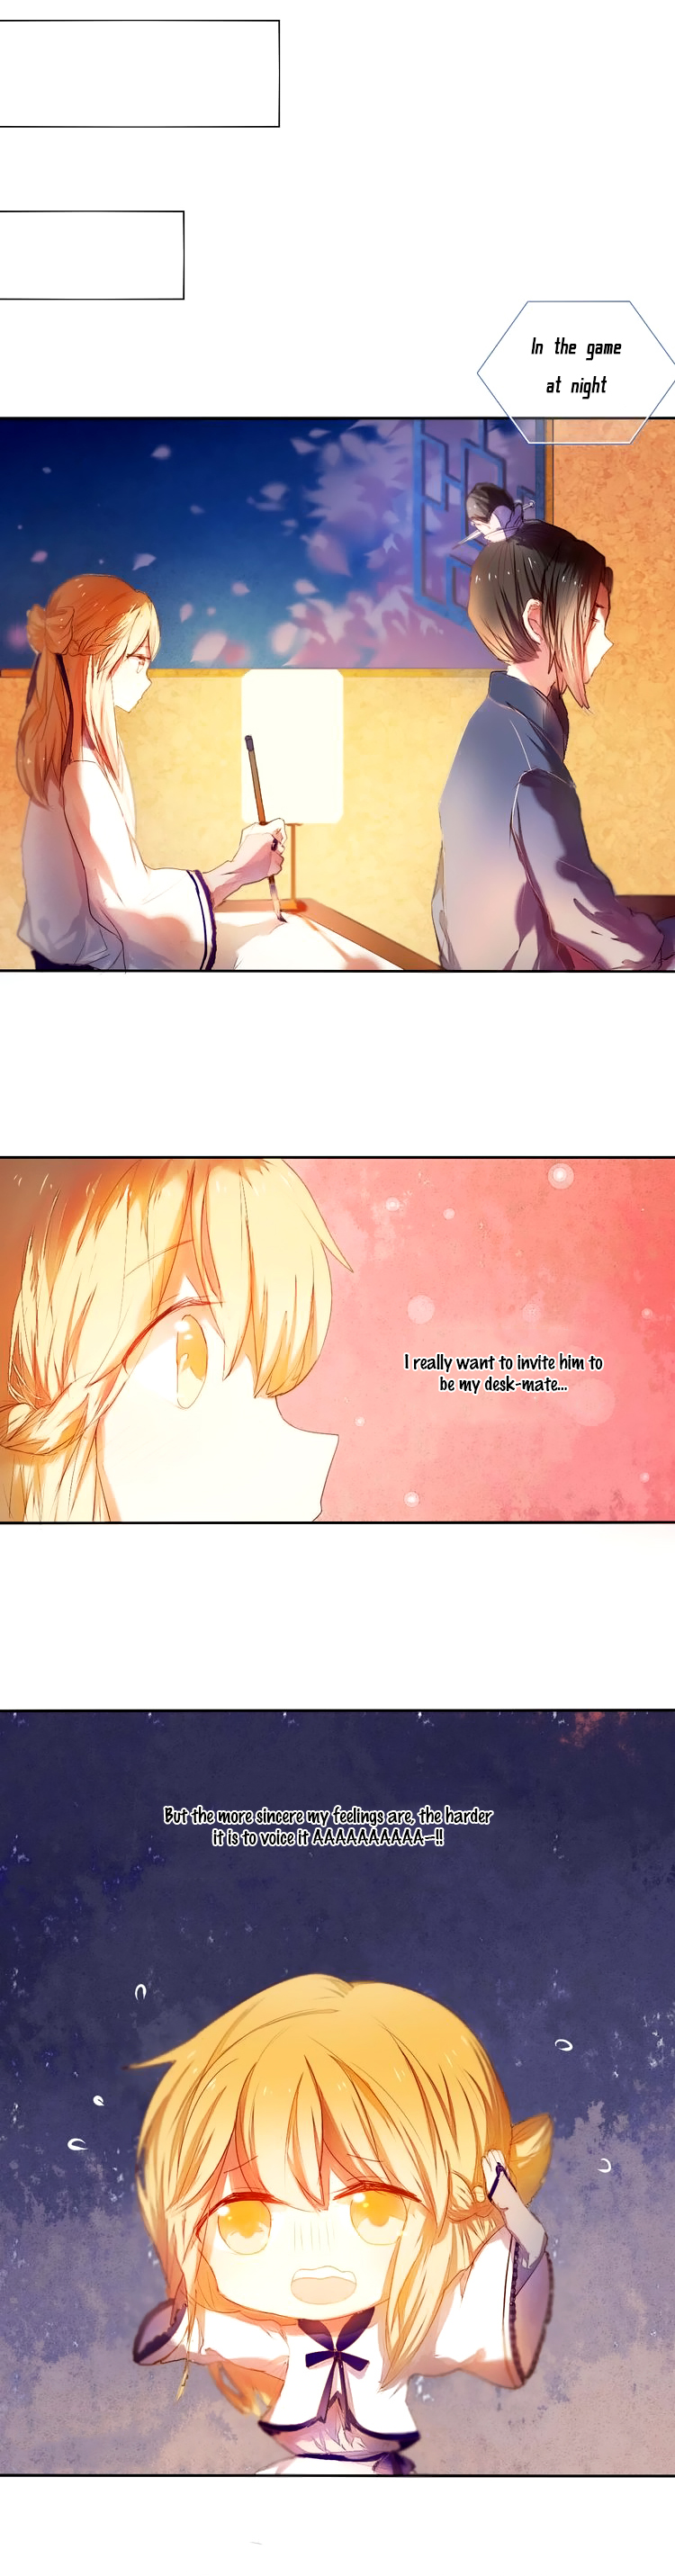 Heart Beat Plan Ch. 3 I Really Want To Be As Admirable As You